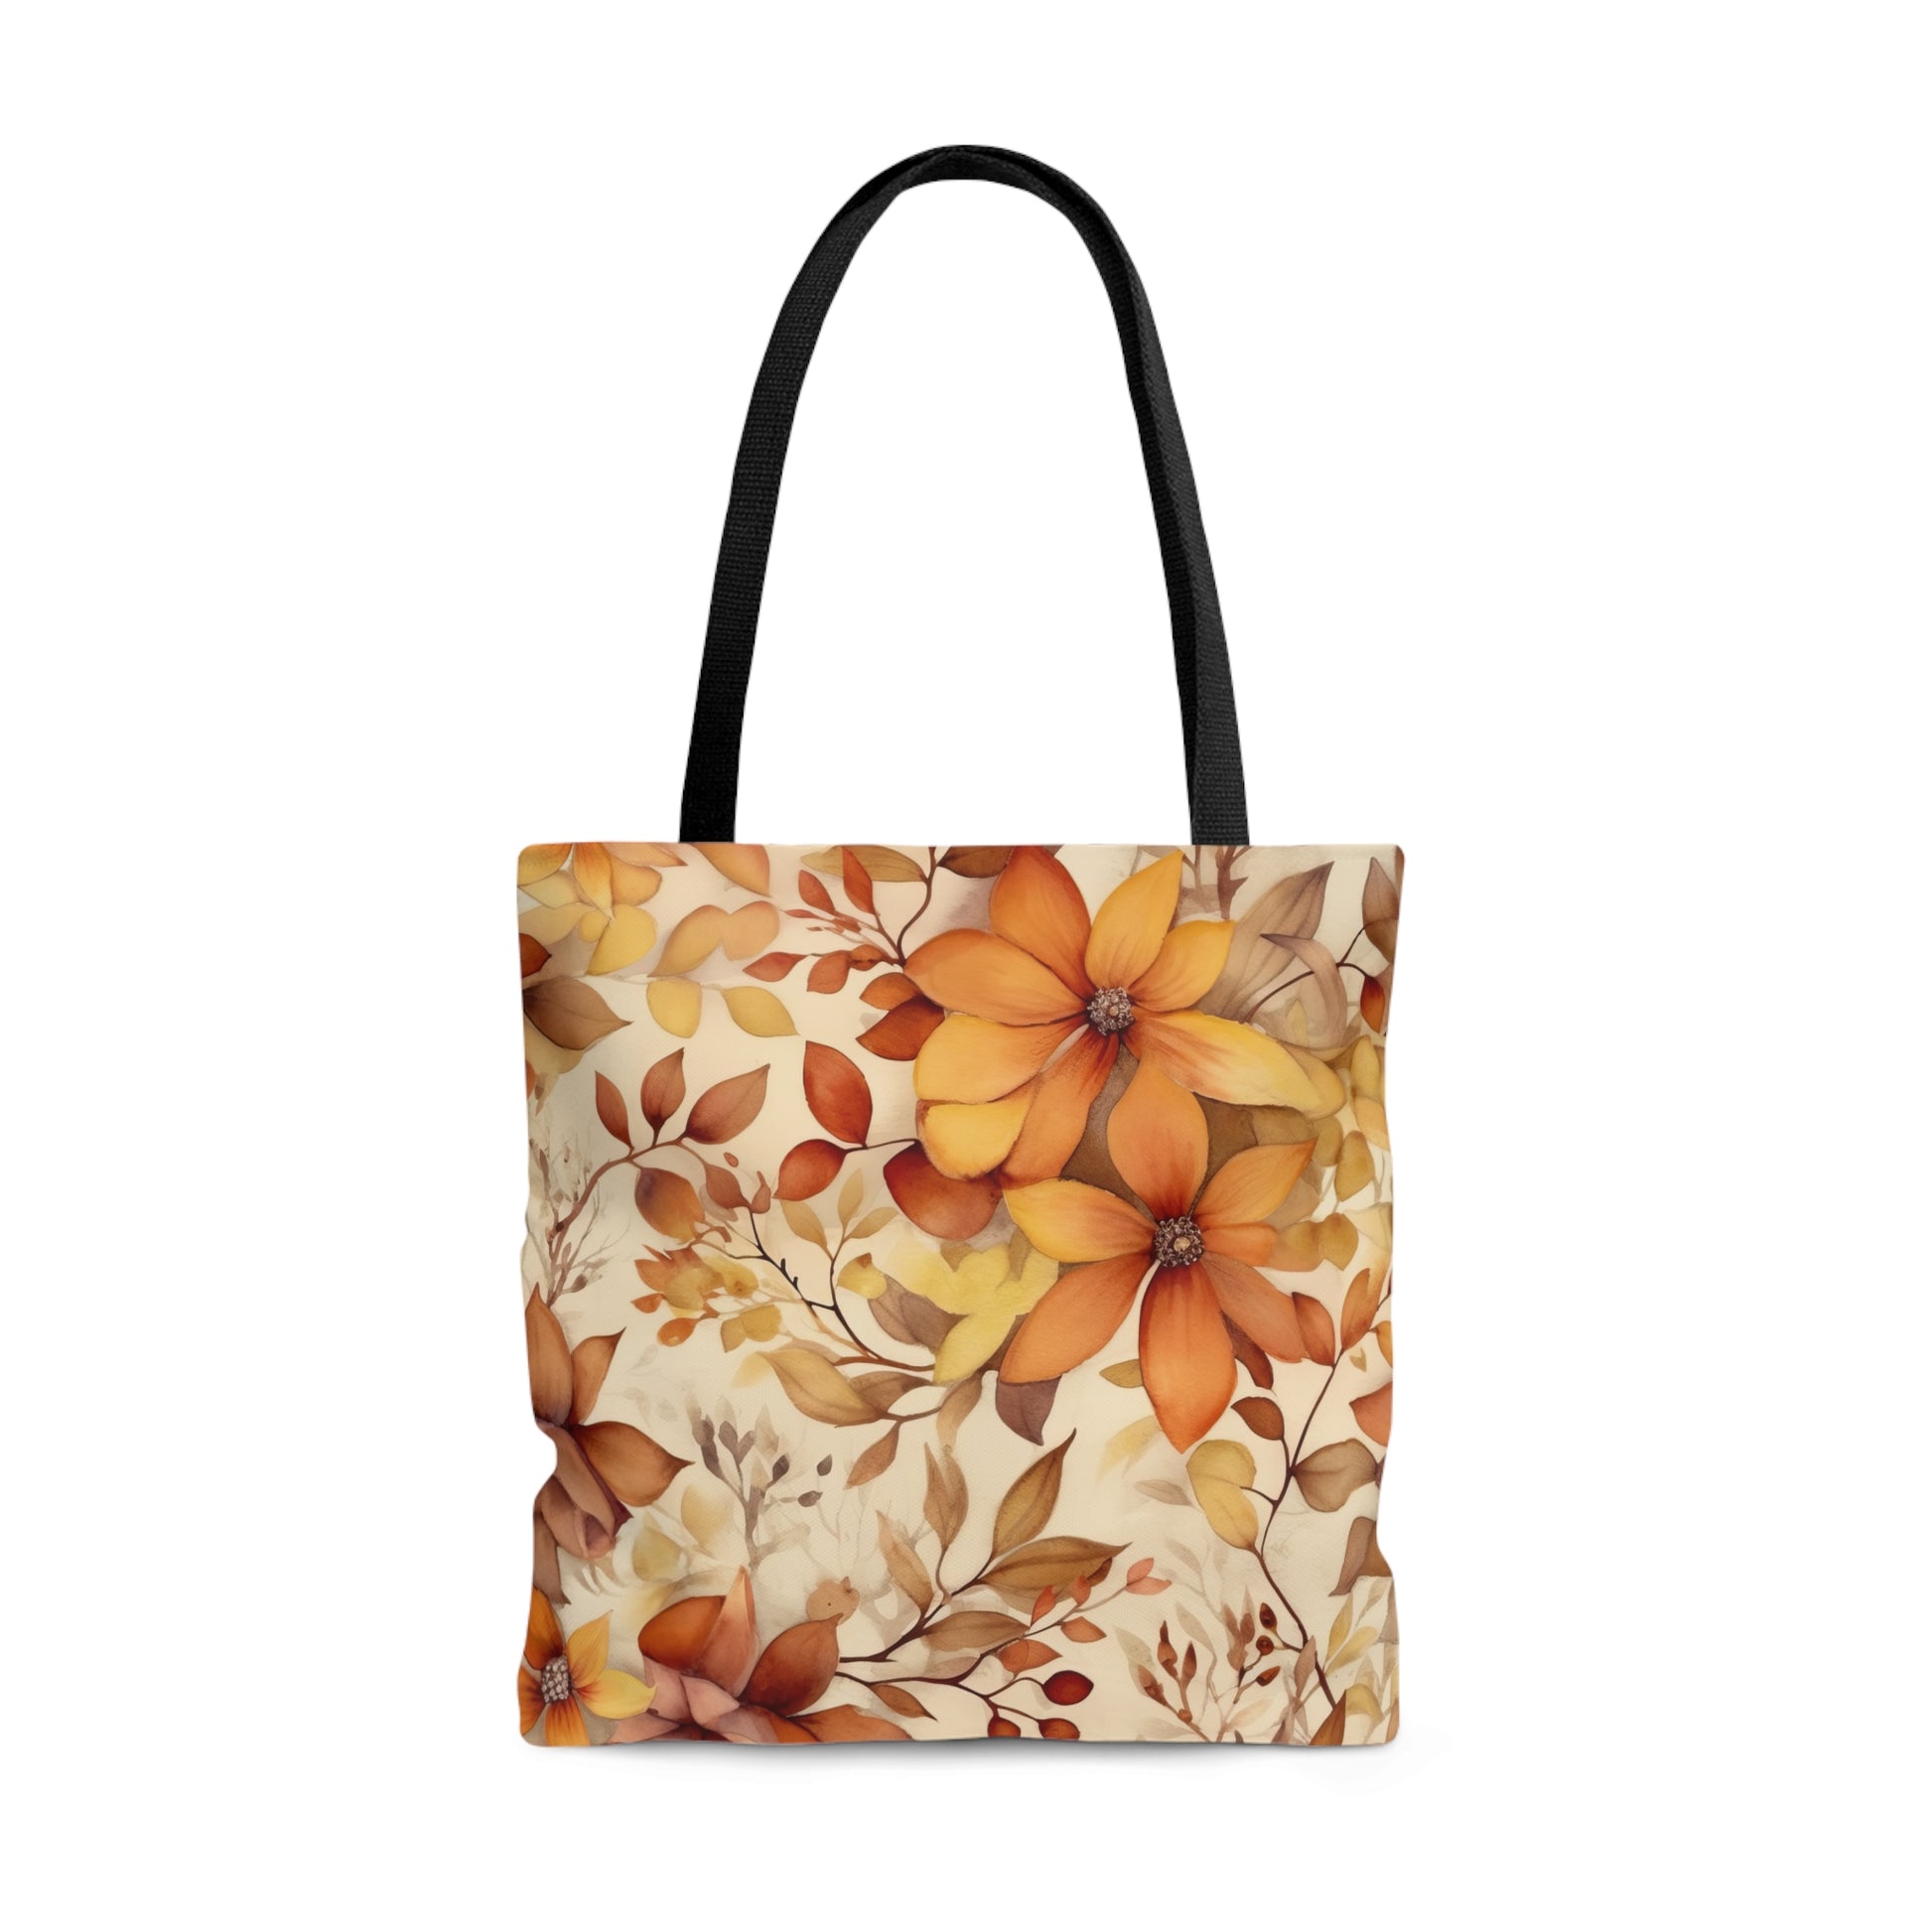 fall floral leaves tote bag in yellow, orange and red colors